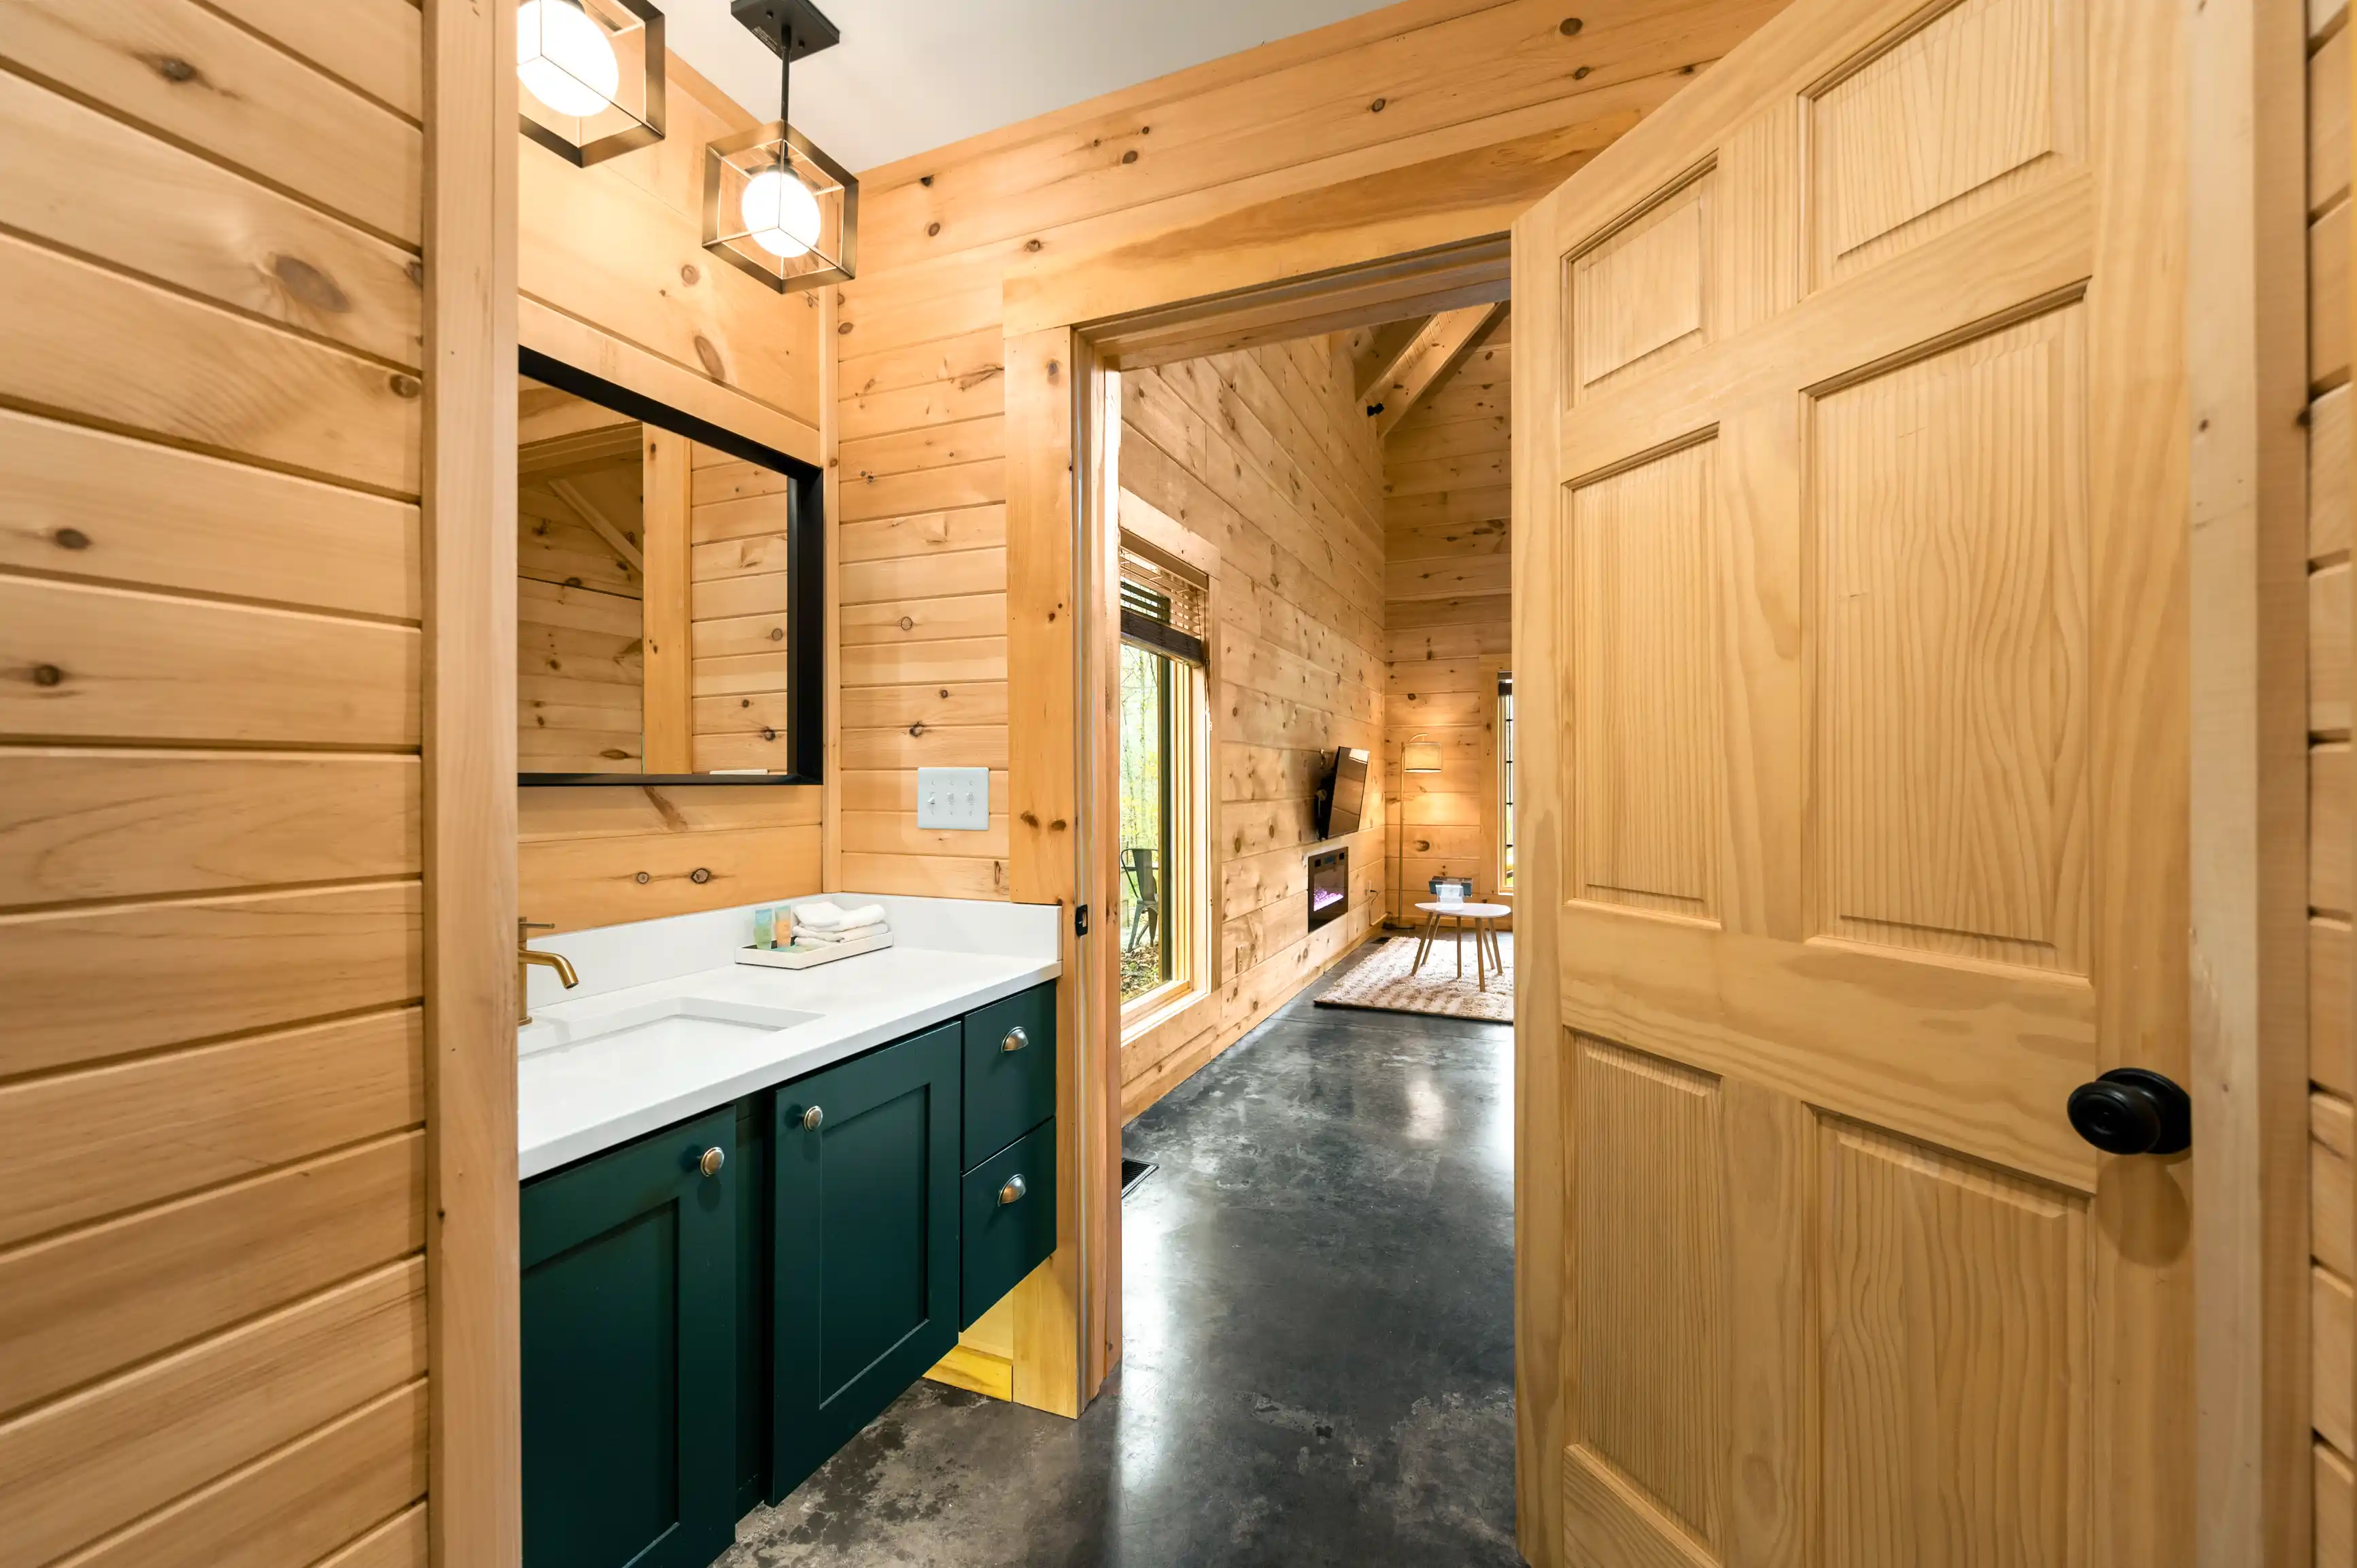 Rustic wooden interior view of a cabin showing a bathroom with a teal vanity and a room with a view of a living space through an open door.